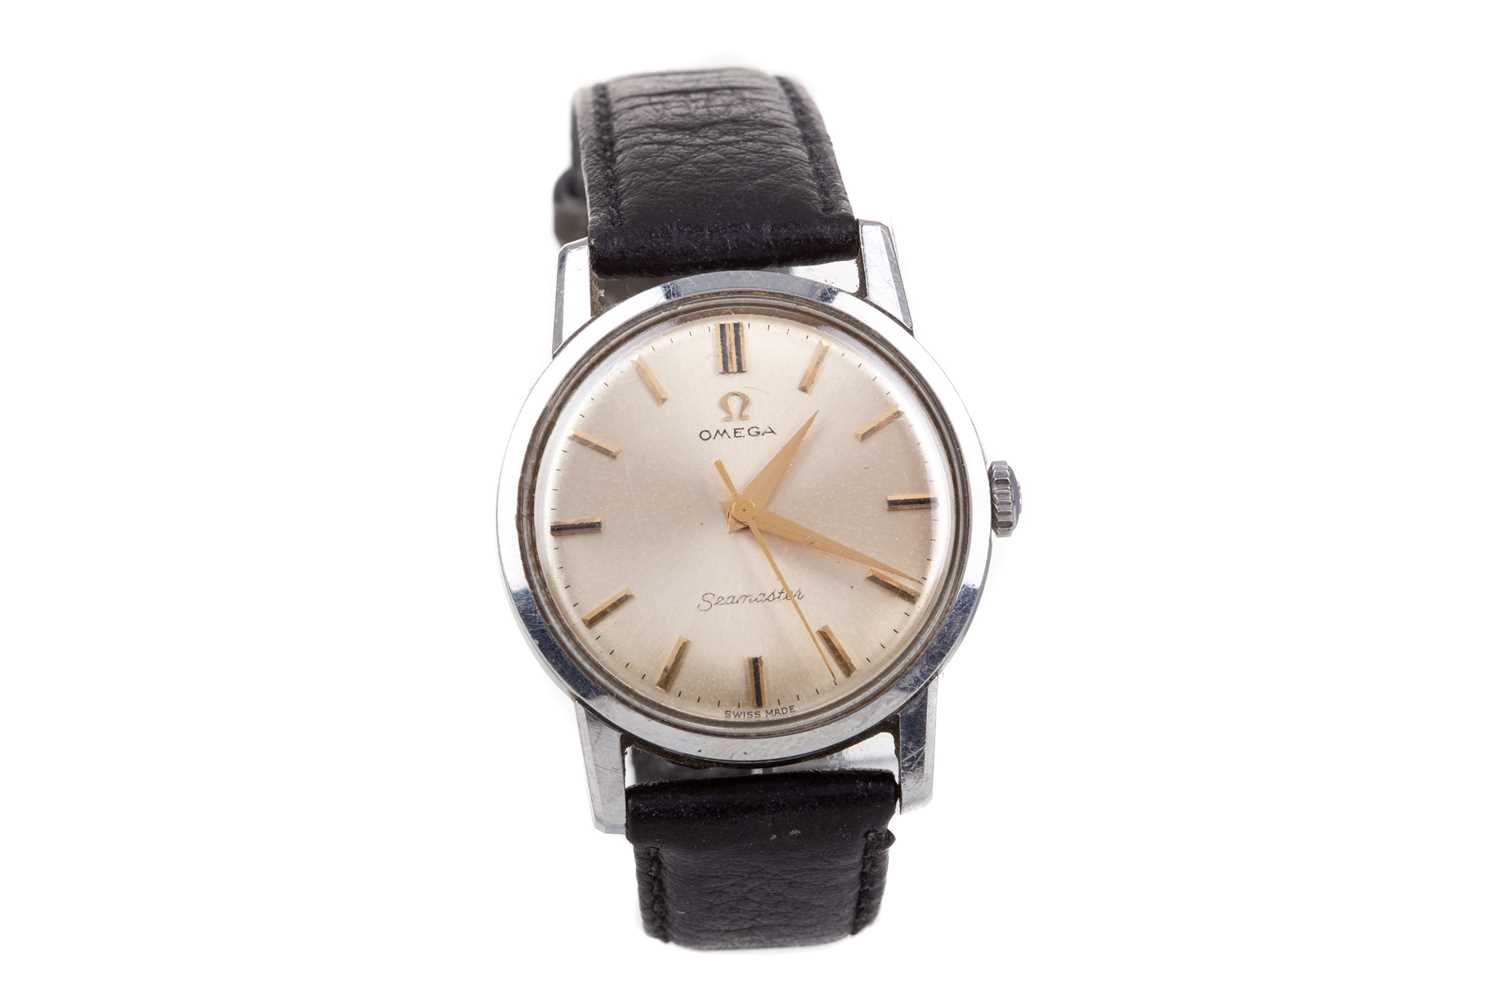 Lot 860 - A GENTLEMAN'S OMEGA SEAMASTER STAINLESS STEEL MANUAL WIND WRIST WATCH